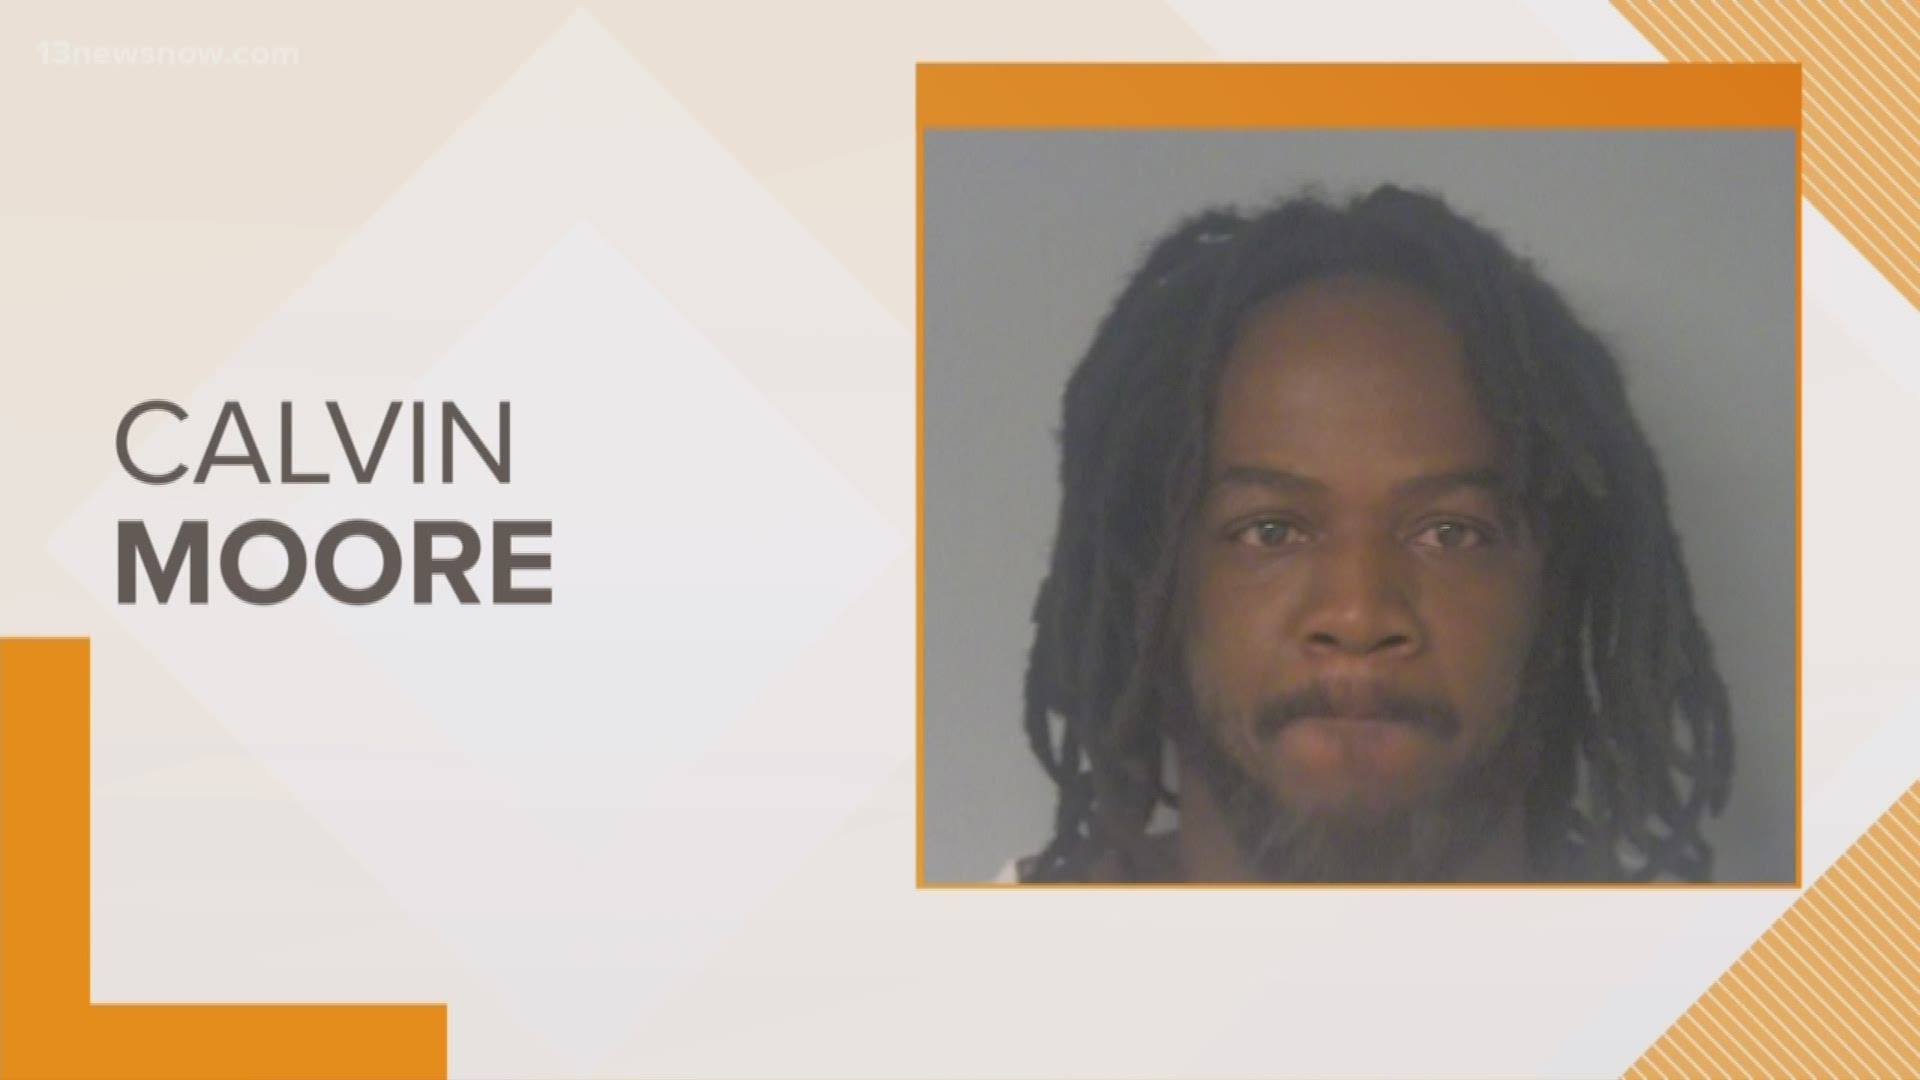 A man faces several charges after shooting into a motel room at a Travel Lodge in Williamsburg that a woman and her two children were occupying. No one was hurt.